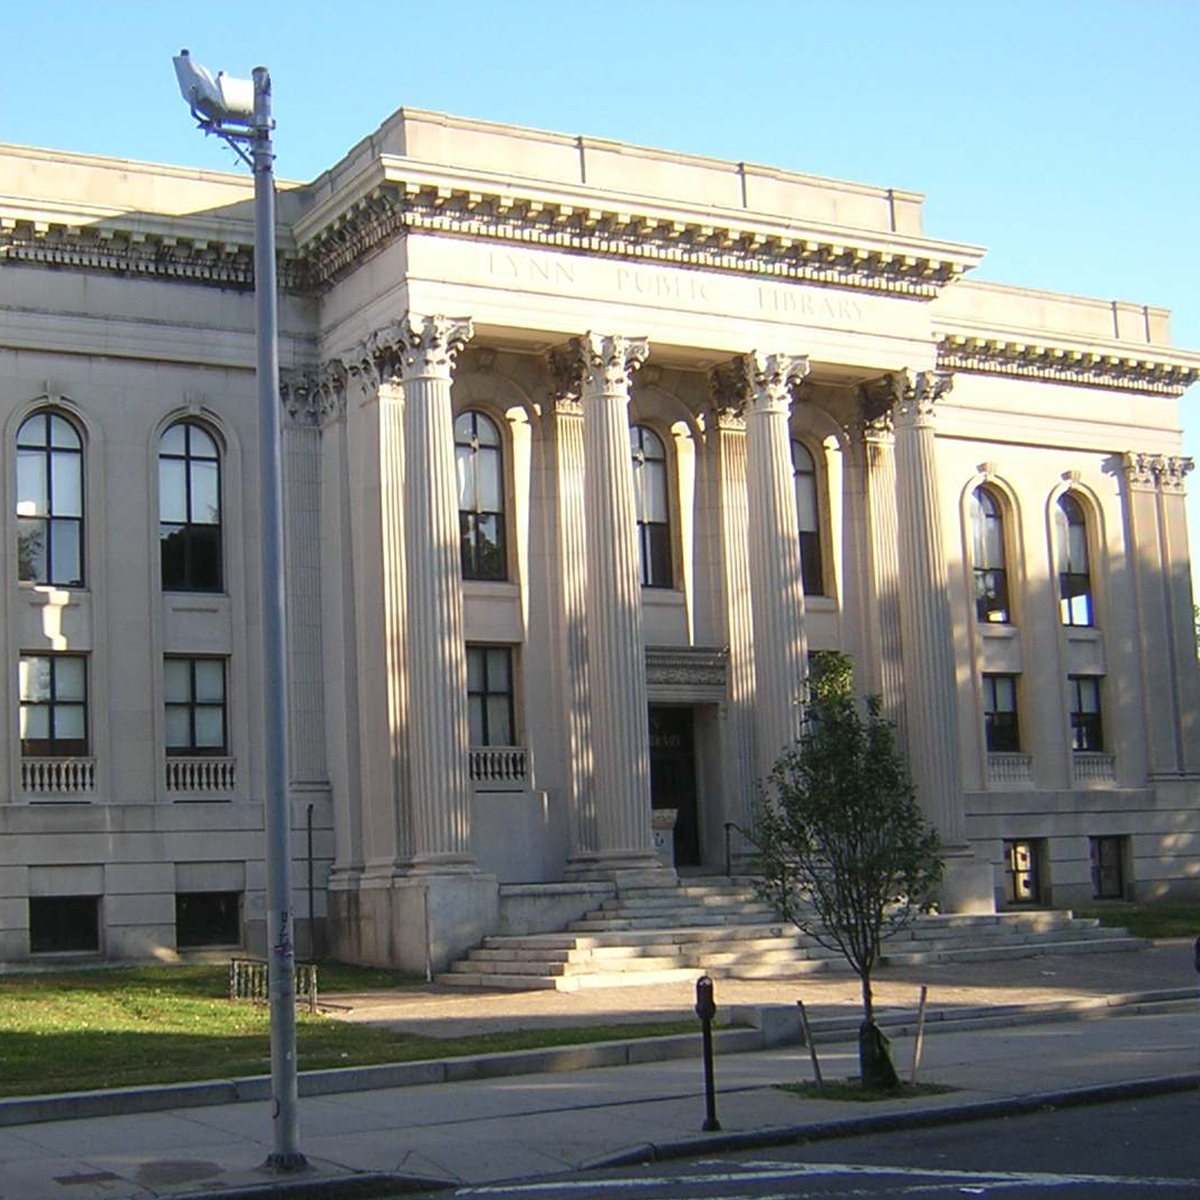 a large white building with columns on the front of it.